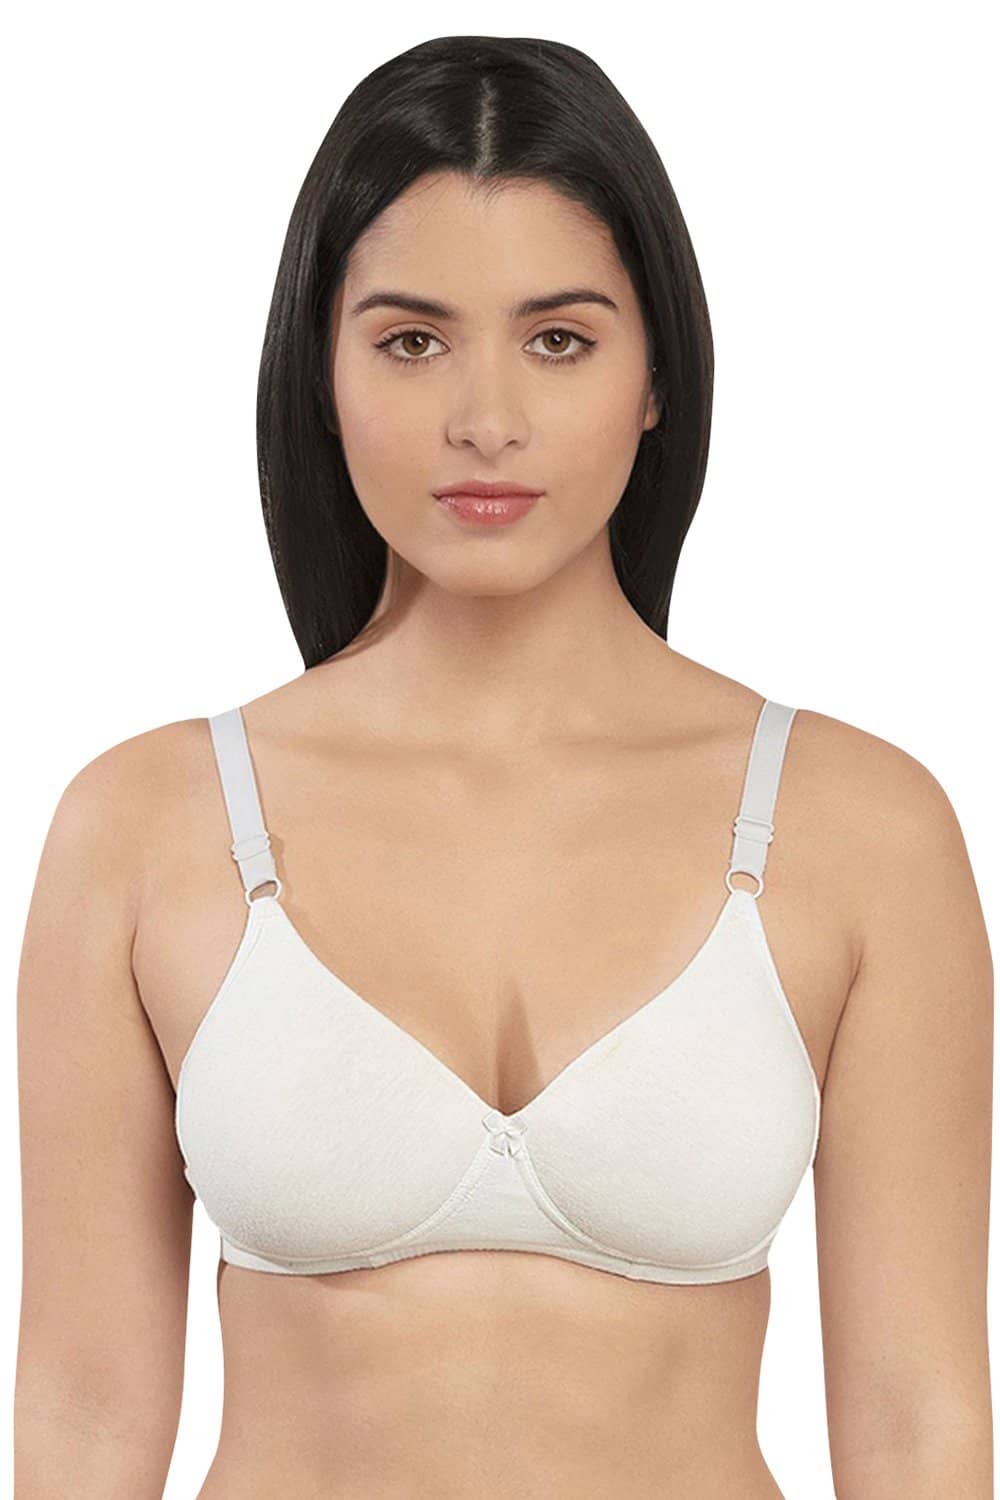 Women's Sale Bras, Up to 40% Off